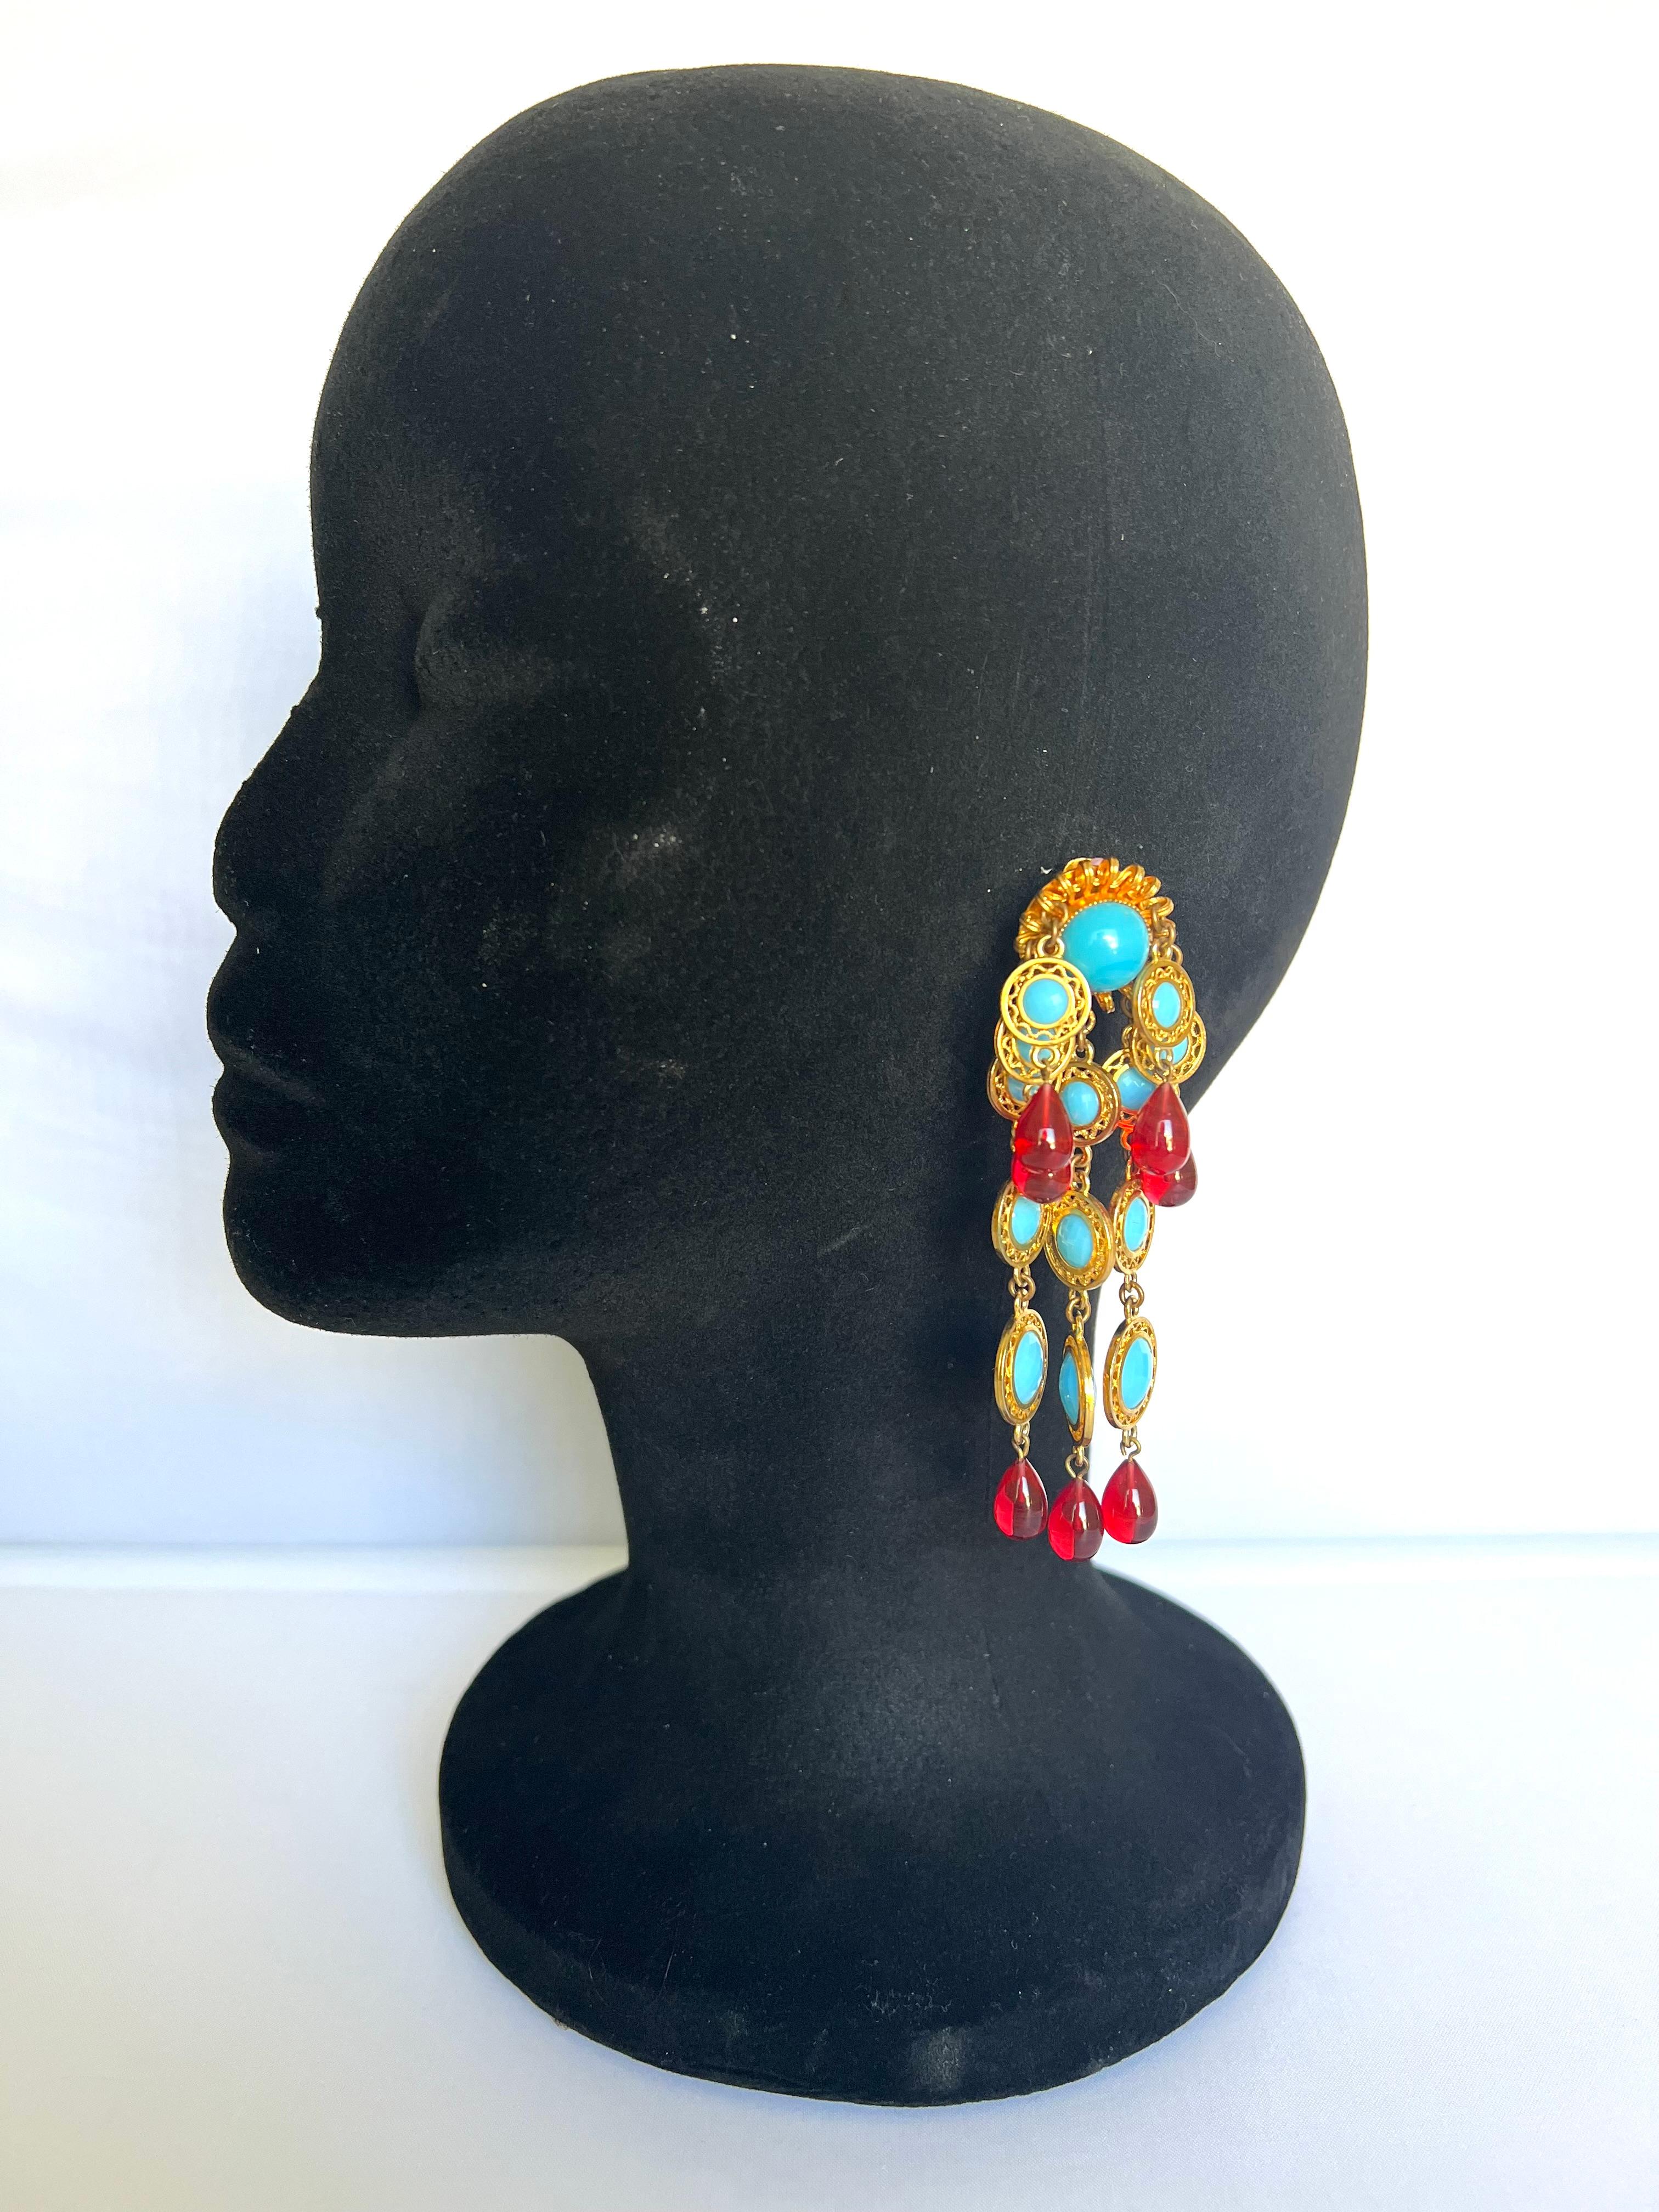 Vintage gilt metal clip-on statement earrings by William de Lillo, LTD circa 1970's. The chandelier earrings feature metal strands adorned with red and turquoise glass-colored cabochons. The earrings come with their original card. Made in New York.